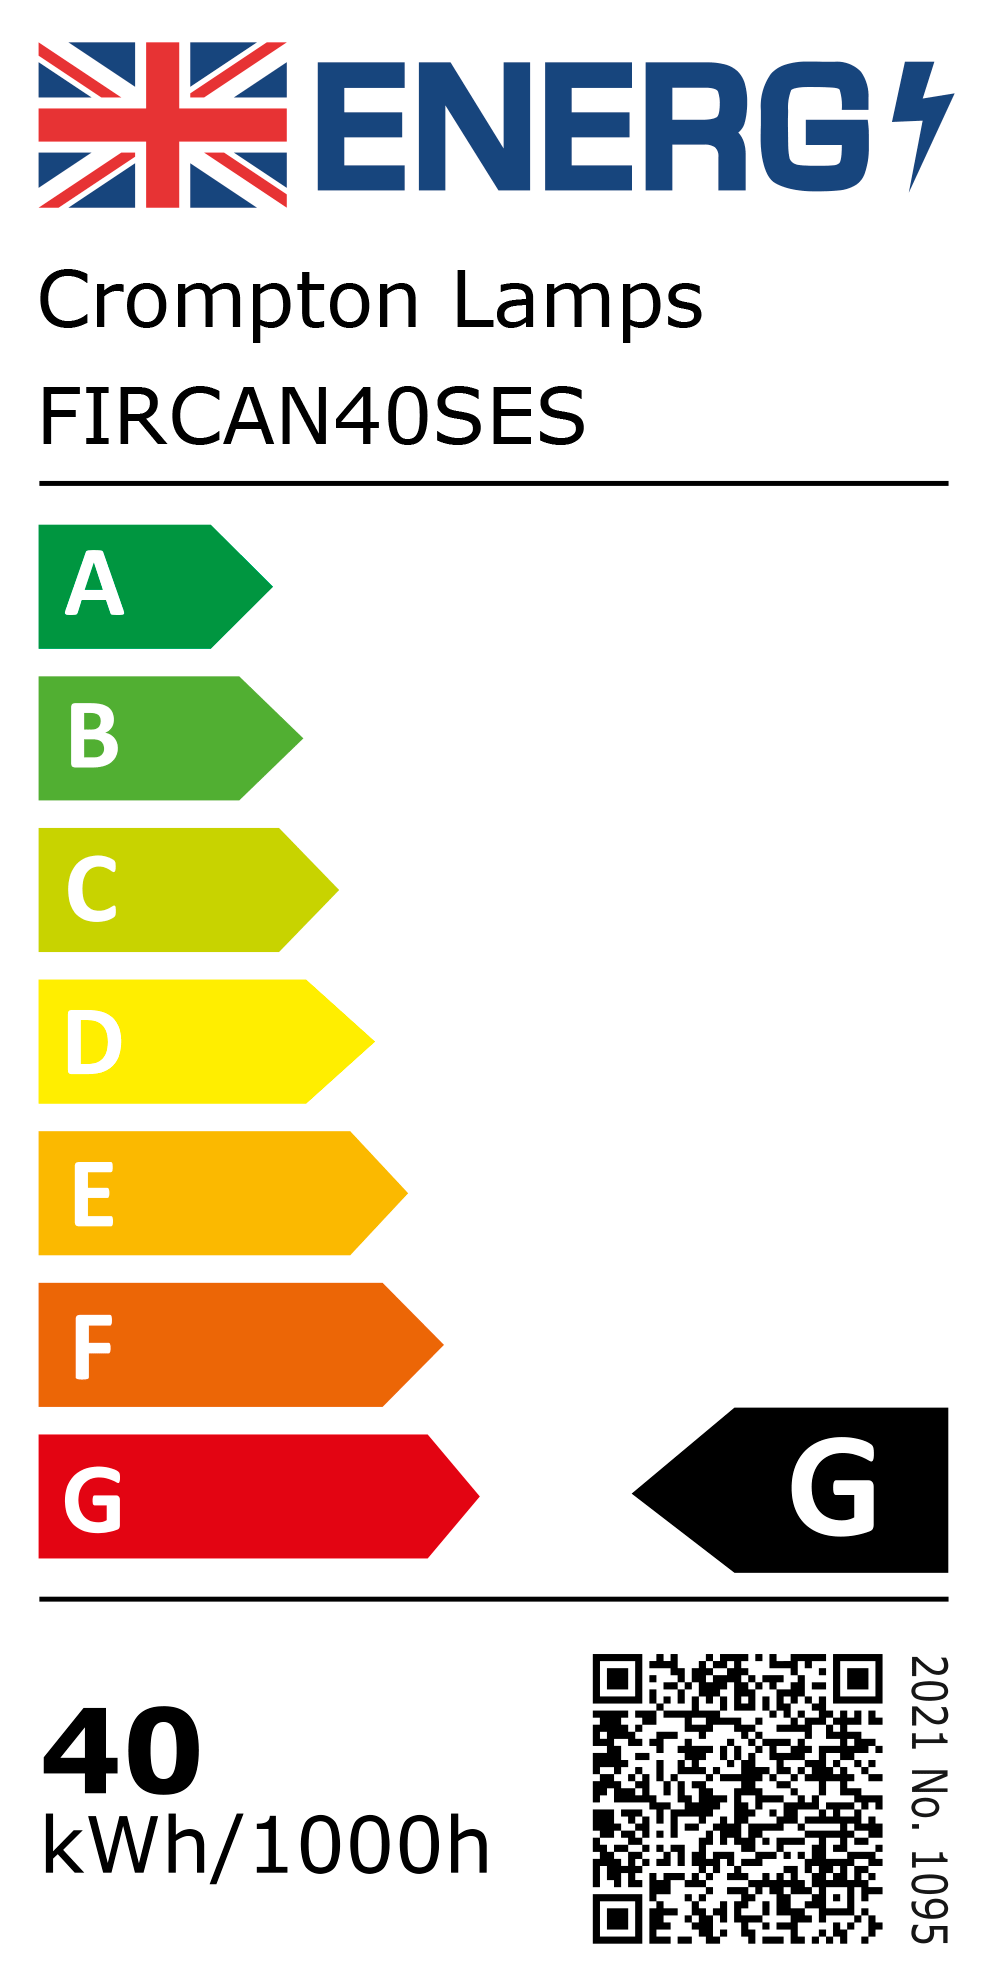 New 2021 Energy Rating Label: Stock Code FIRCAN40SES